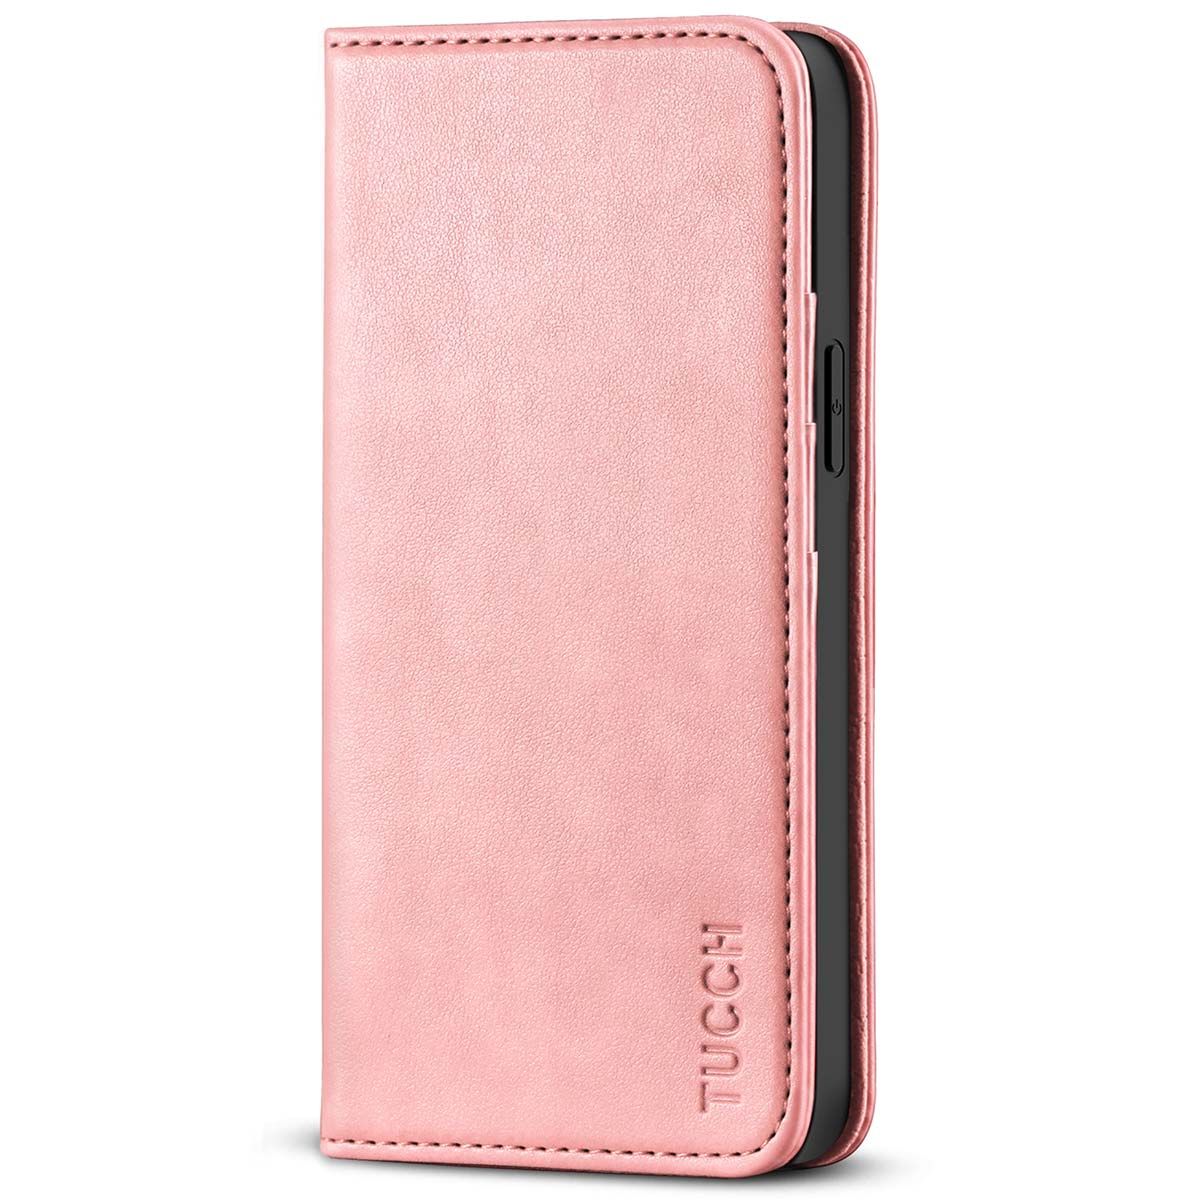 TUCCH iPhone 13 Pro Max Leather Case, iPhone 13 Pro Max PU Leather ...